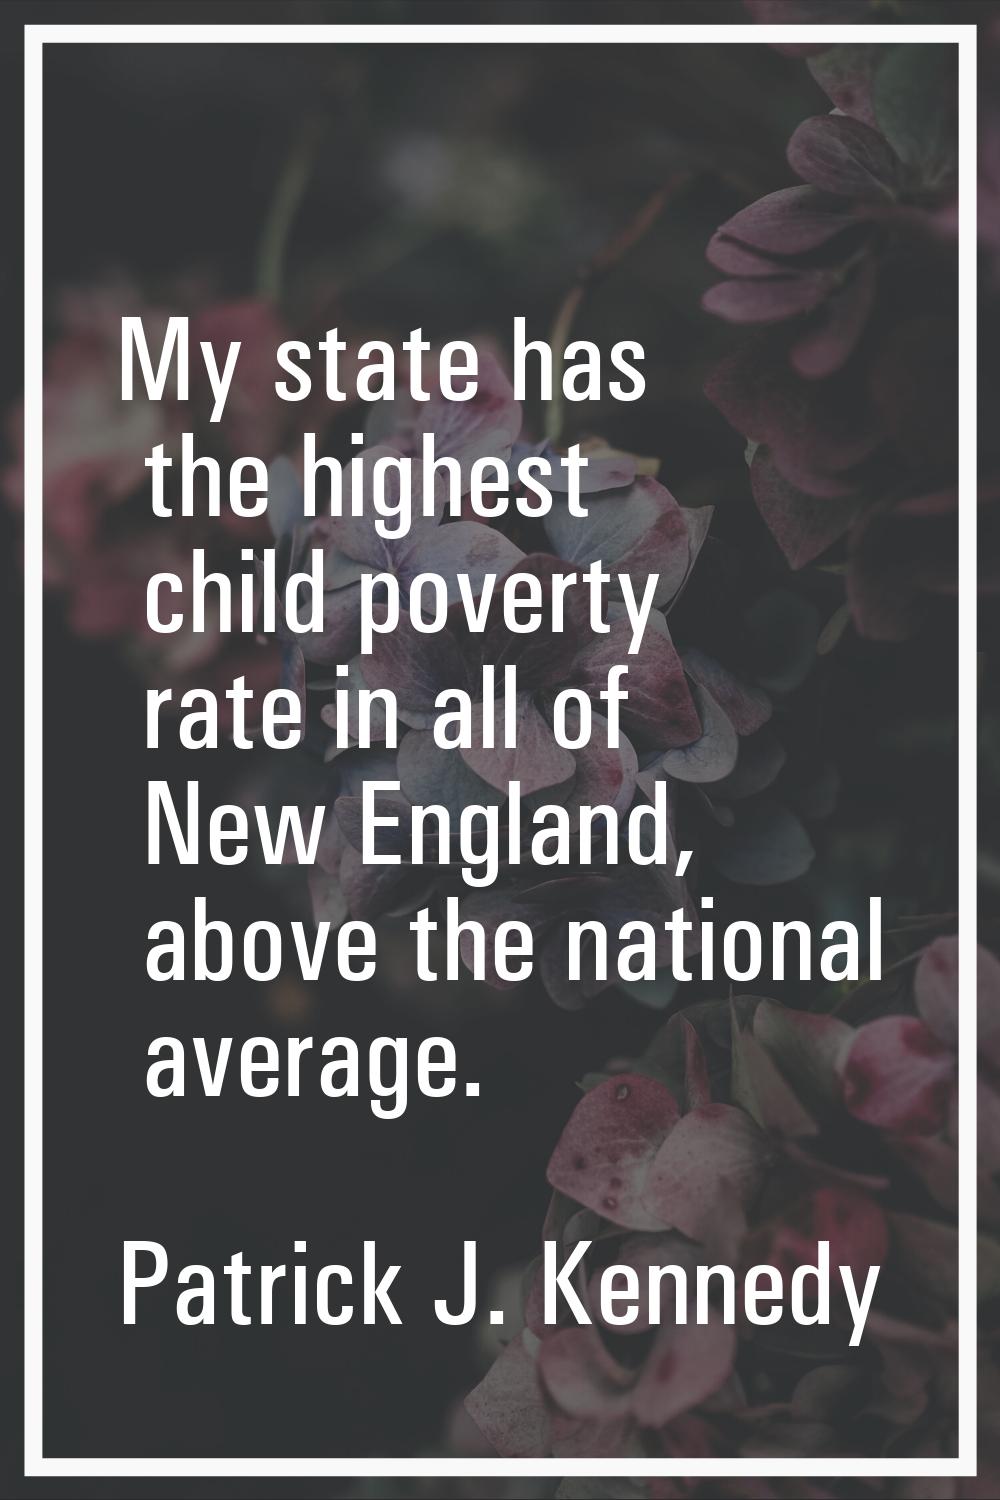 My state has the highest child poverty rate in all of New England, above the national average.